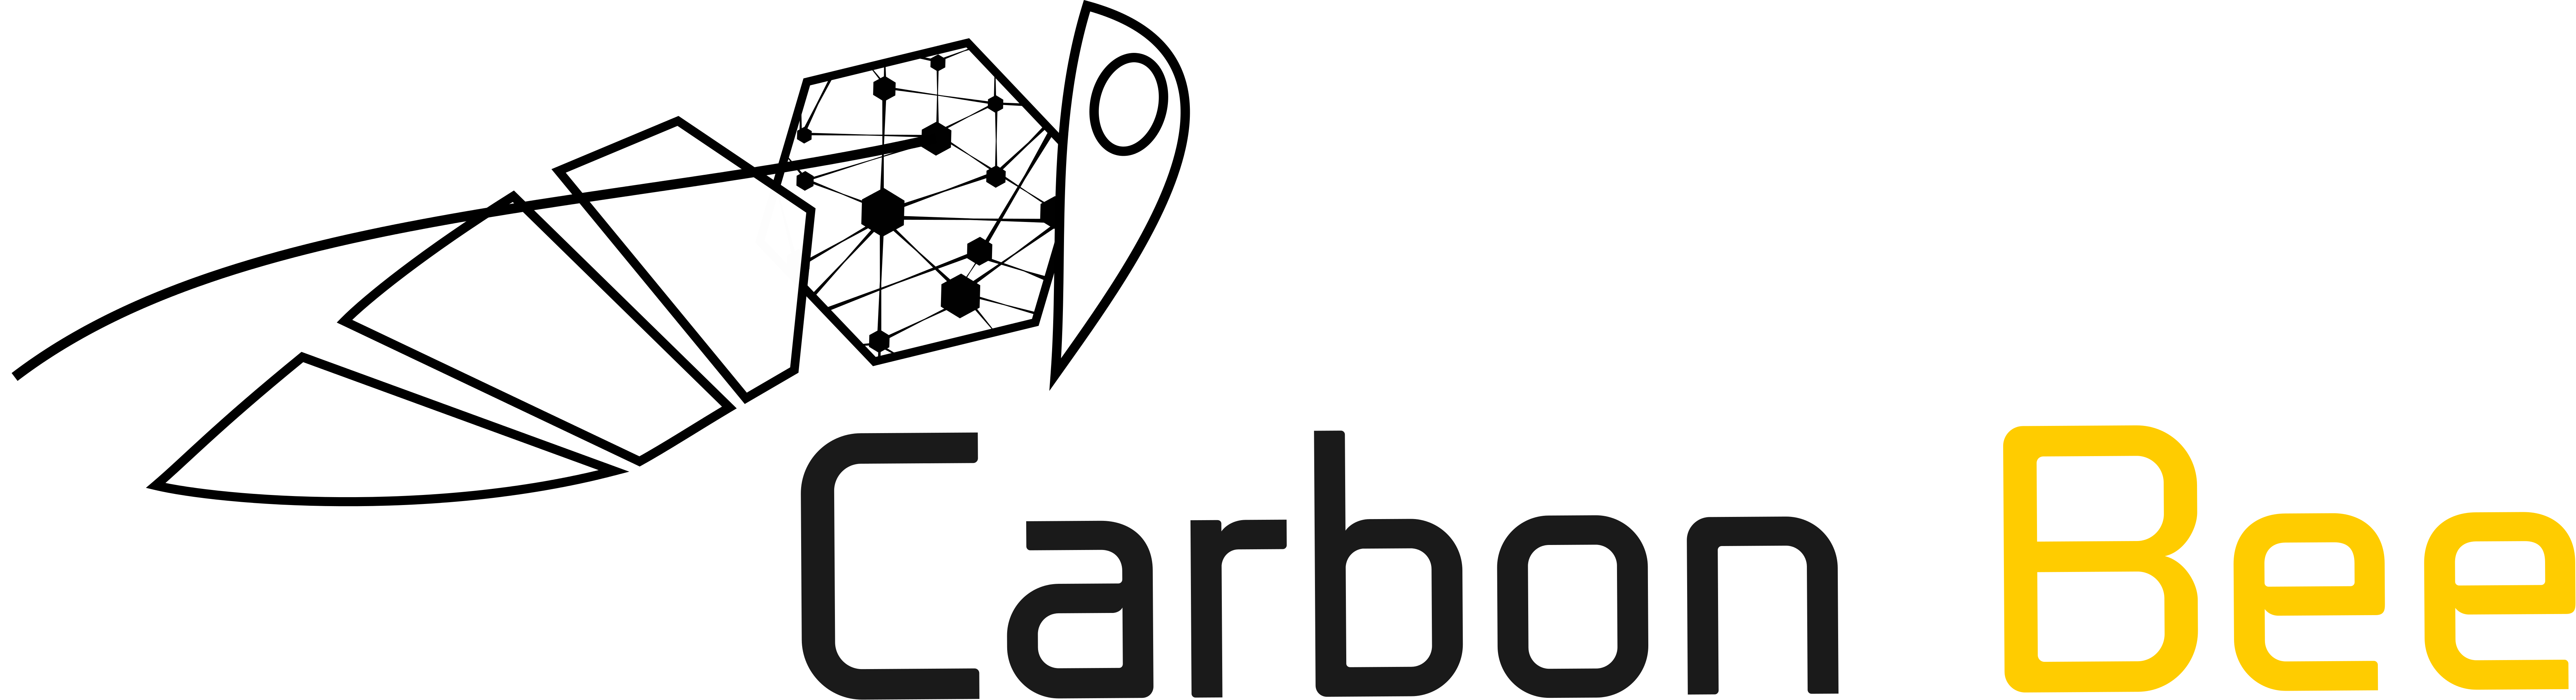 carbon-bee-logo-complet-2016